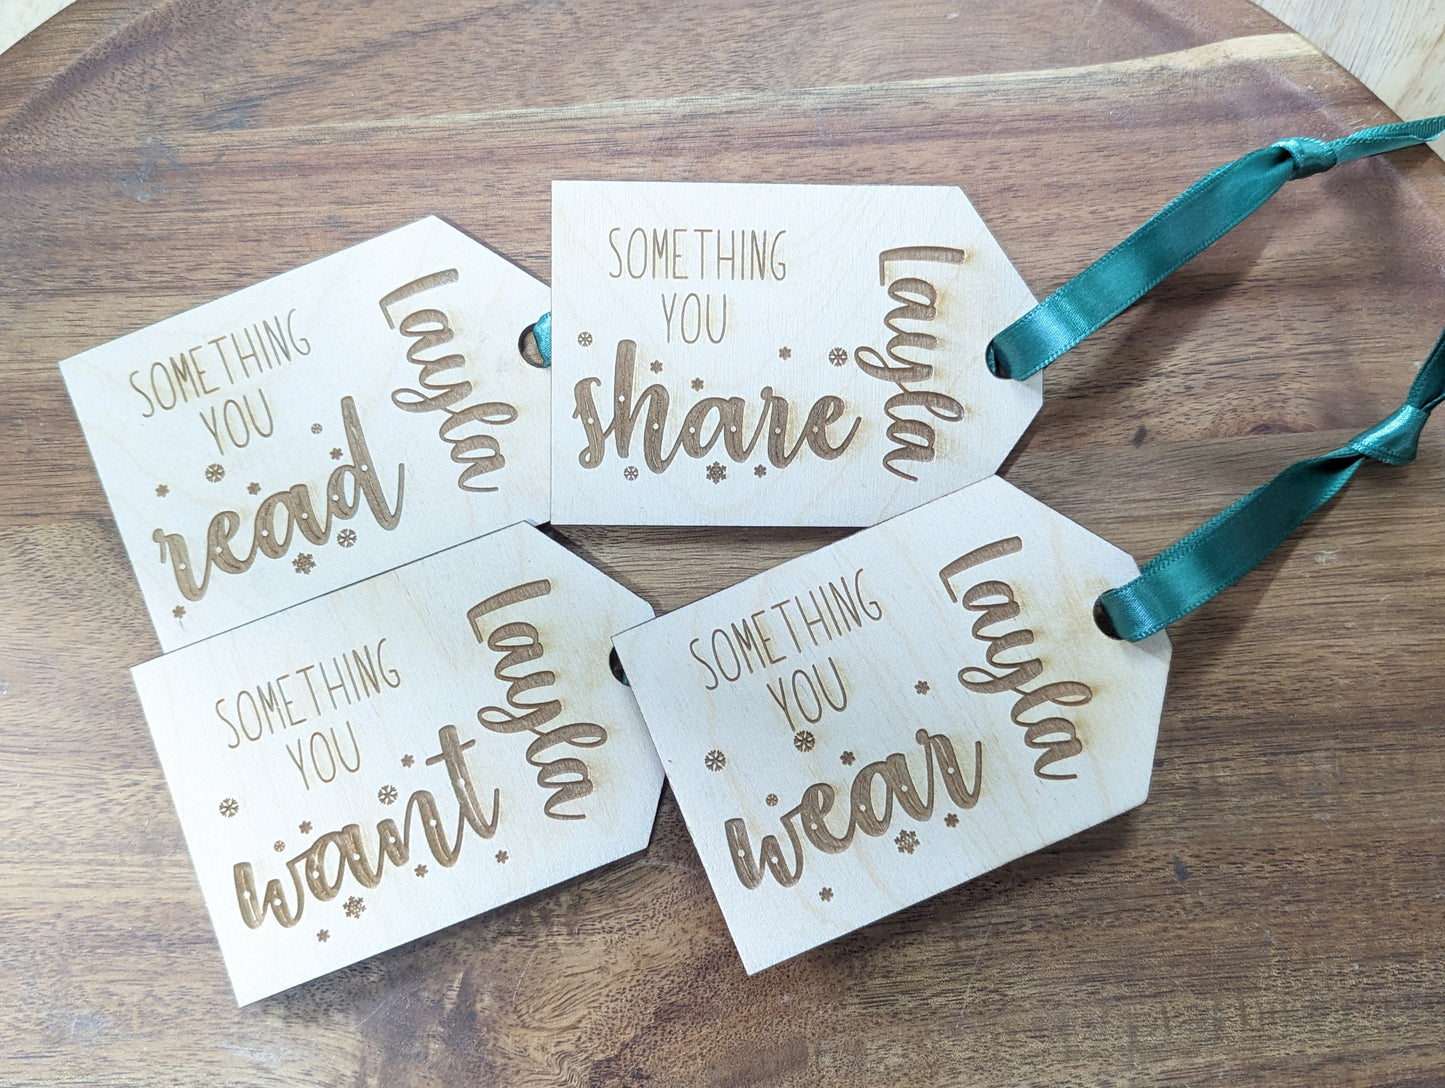 Set of 4 Custom Wooden Gift Tags Made of Wood with - Something You Wear Need Want and Read - Set of 4 Personalized Gifts